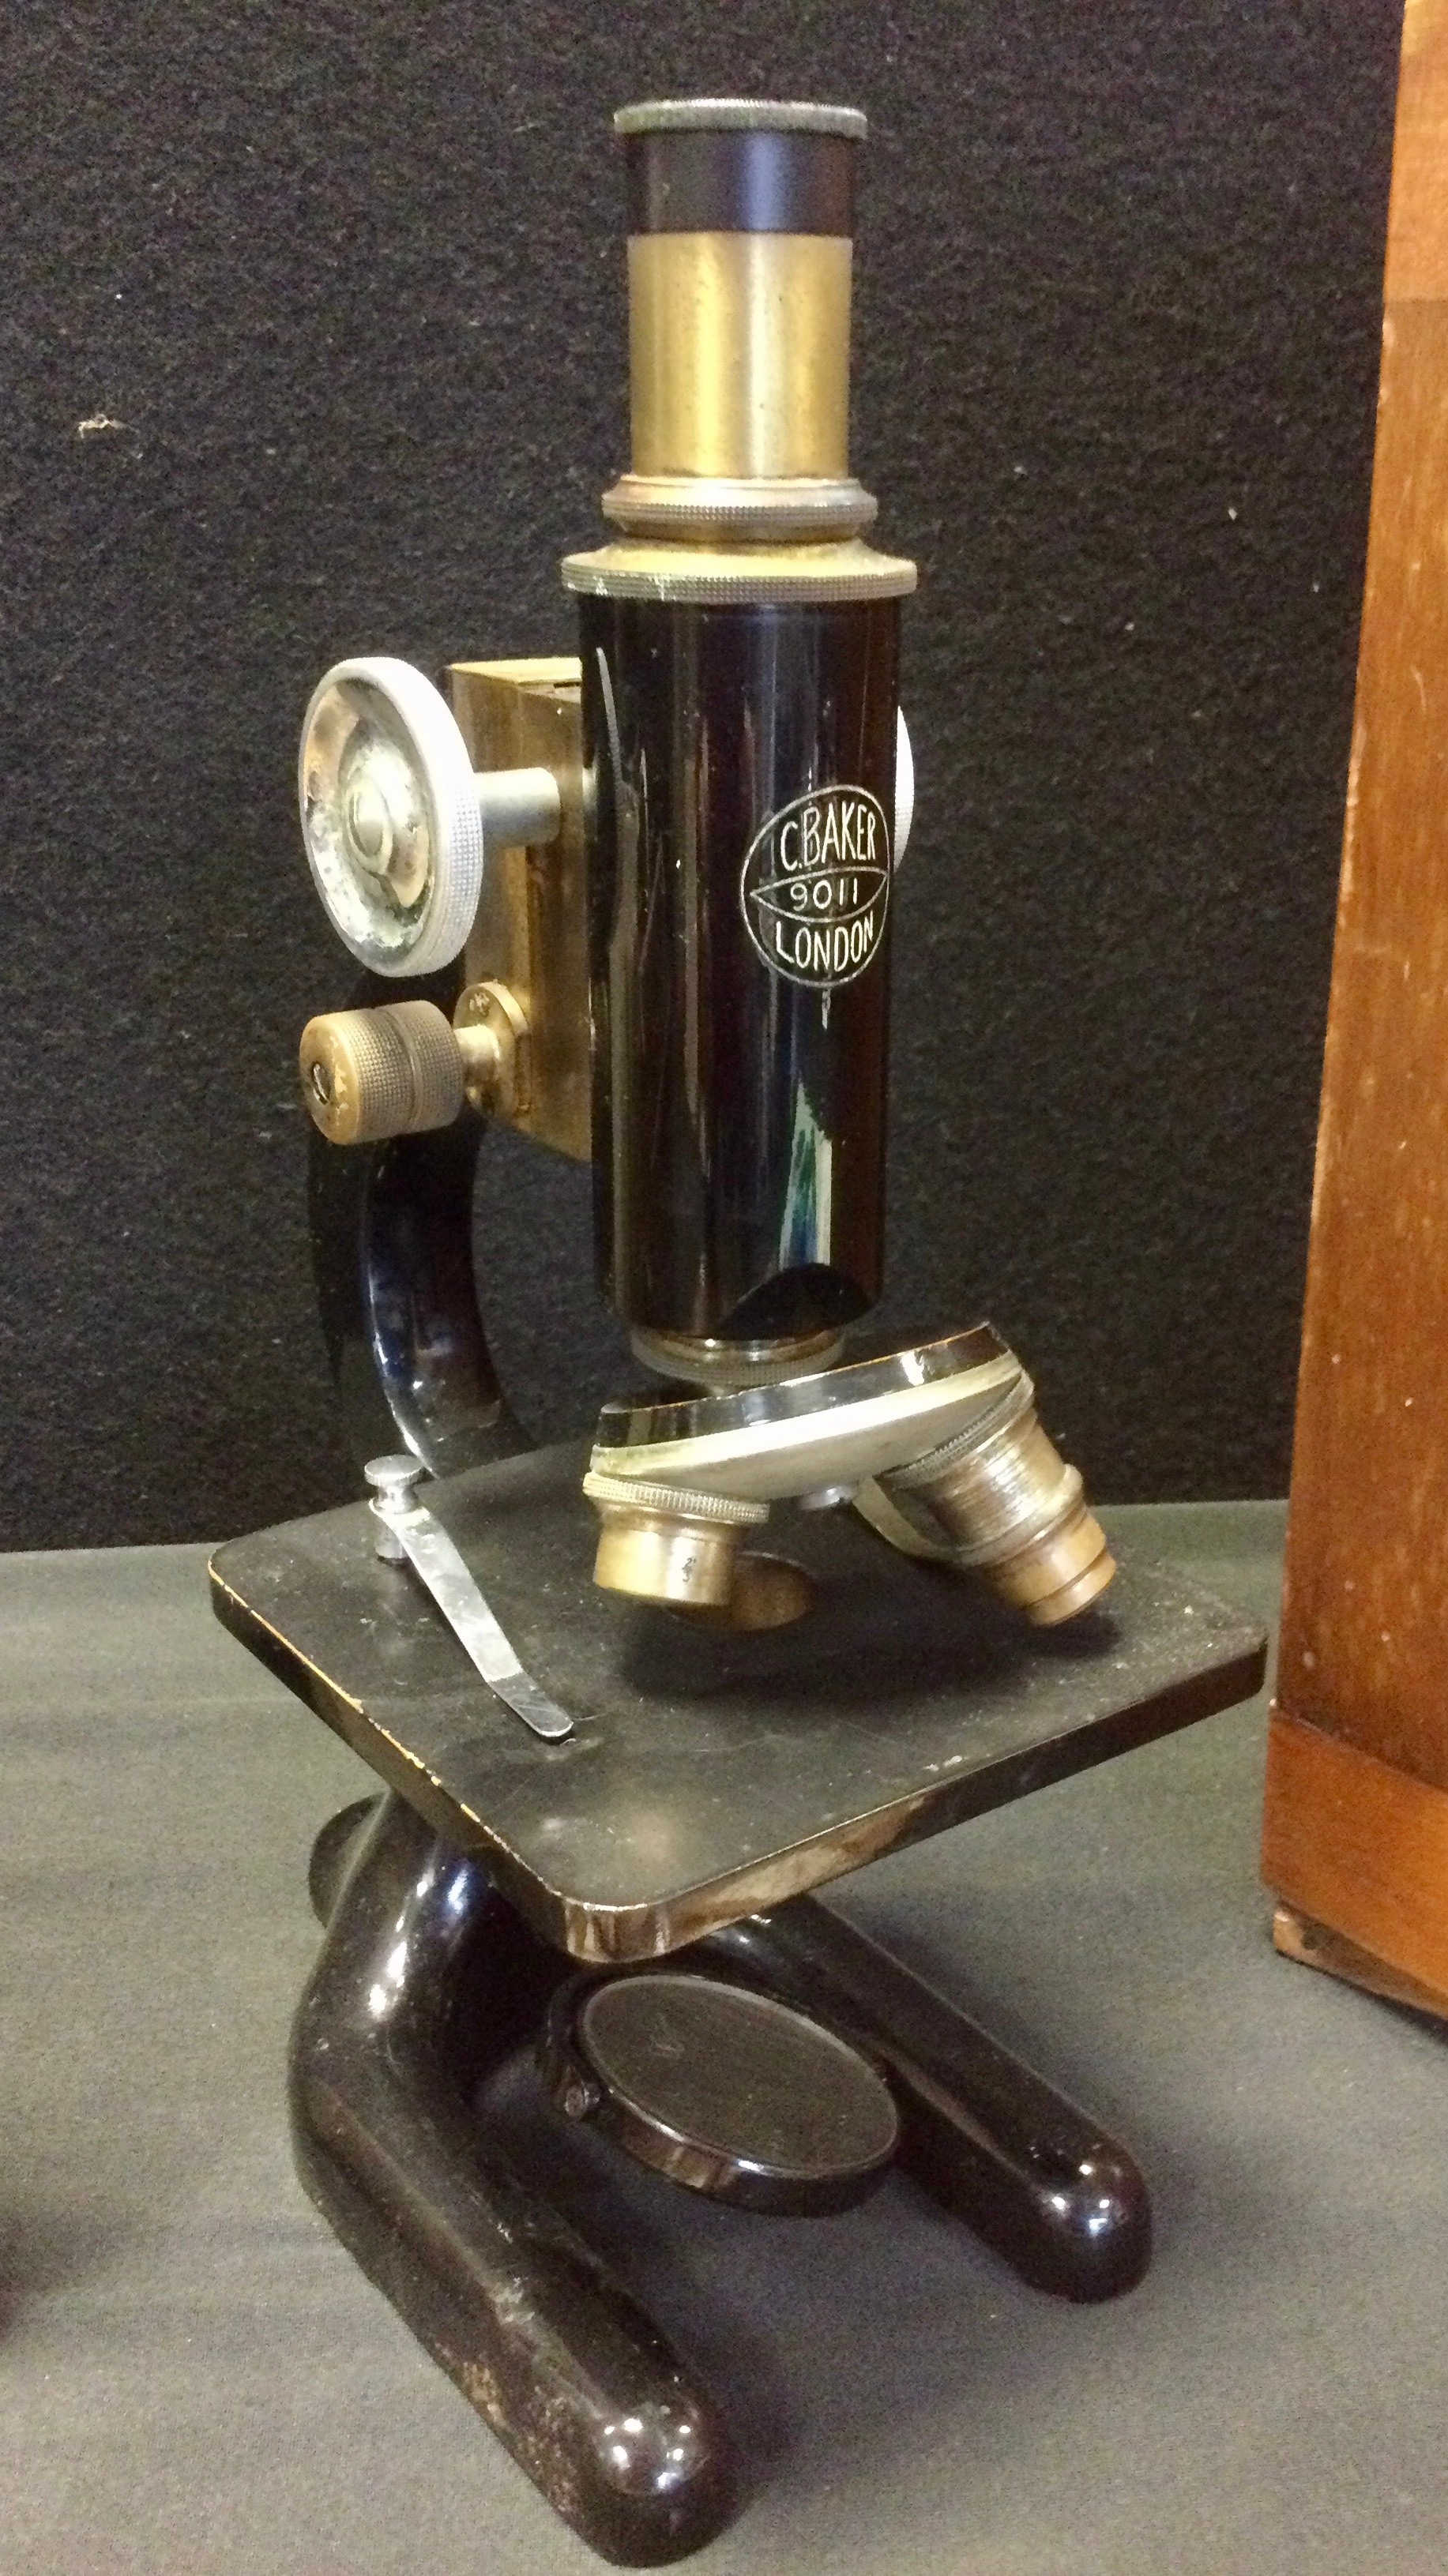 C. Baker 9011 London Microscope, rotating lens, fitted base, boxed, conforming specimen trays - Image 3 of 3